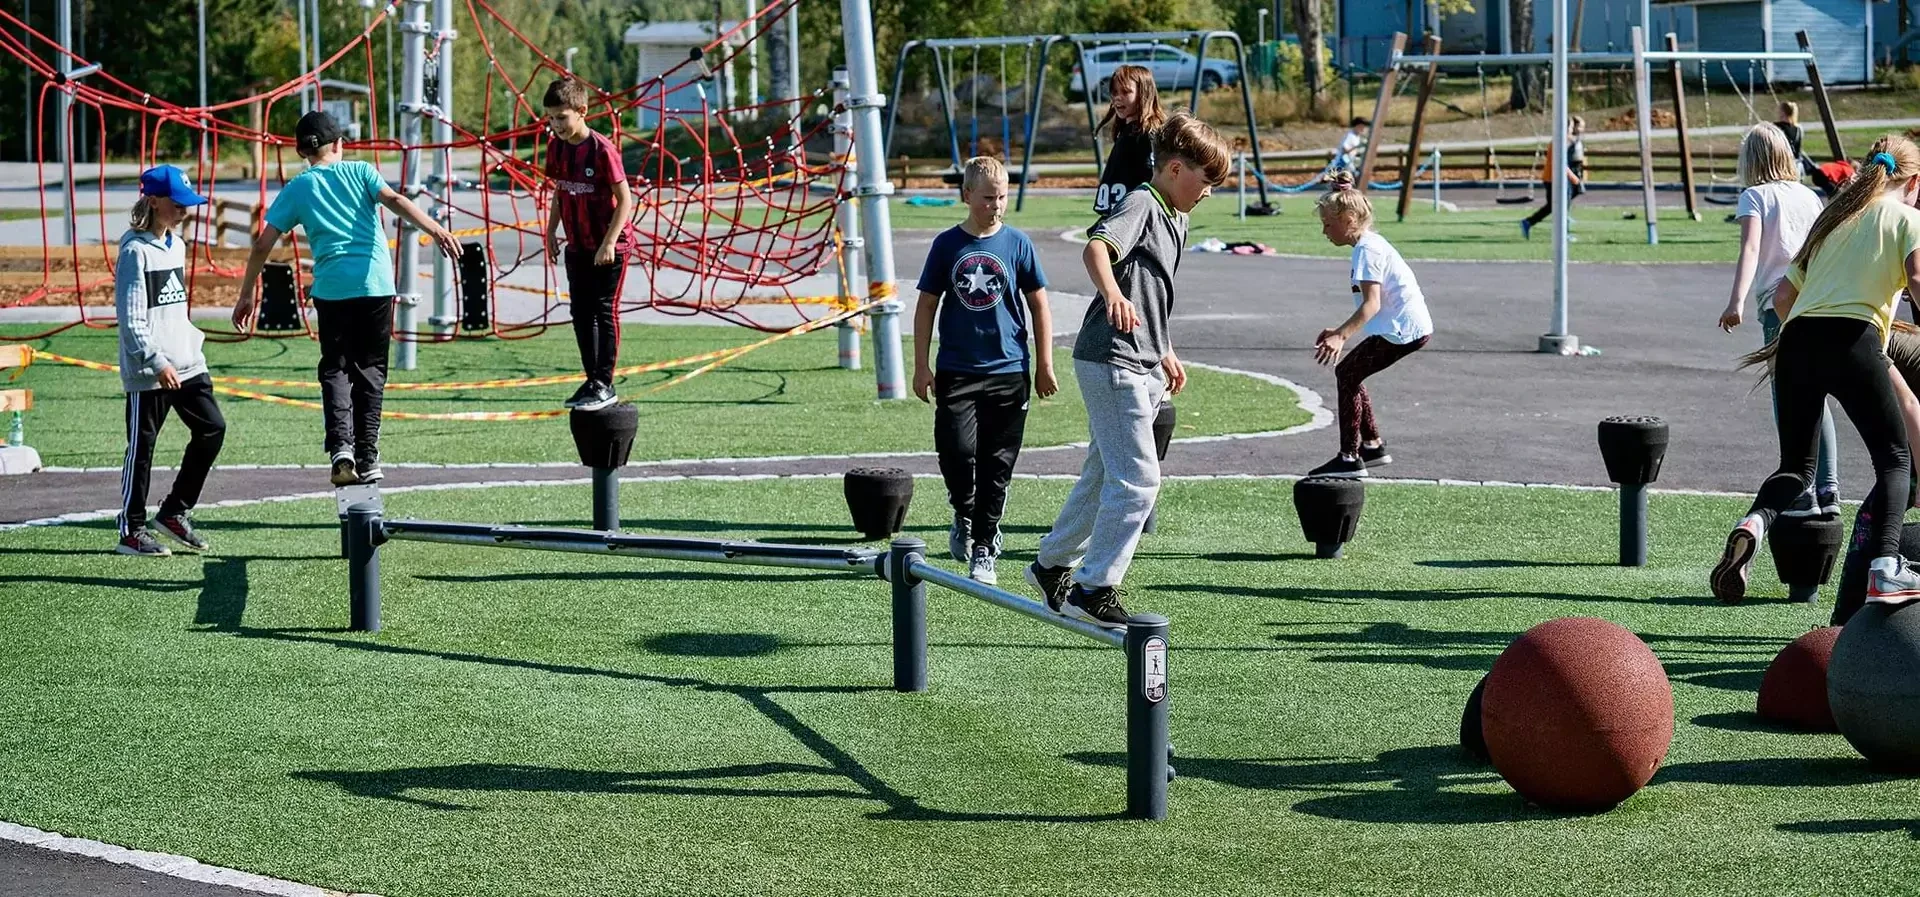 teenagers training on an obstacle course outdoor gym equipment hero image